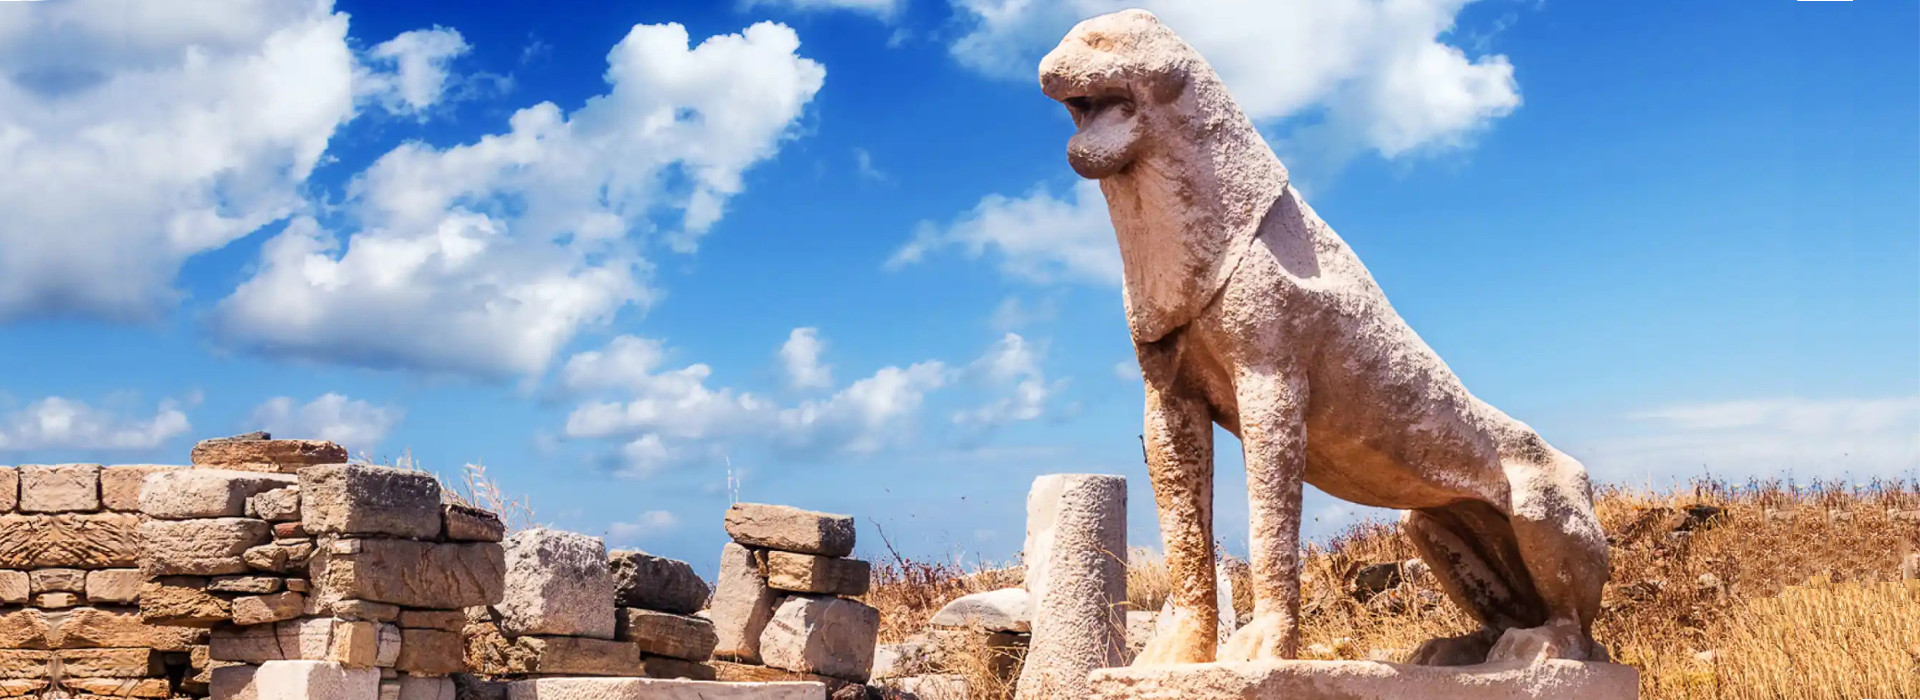 Guided Delos Tour - Half-Day Trip from Mykonos - Book online